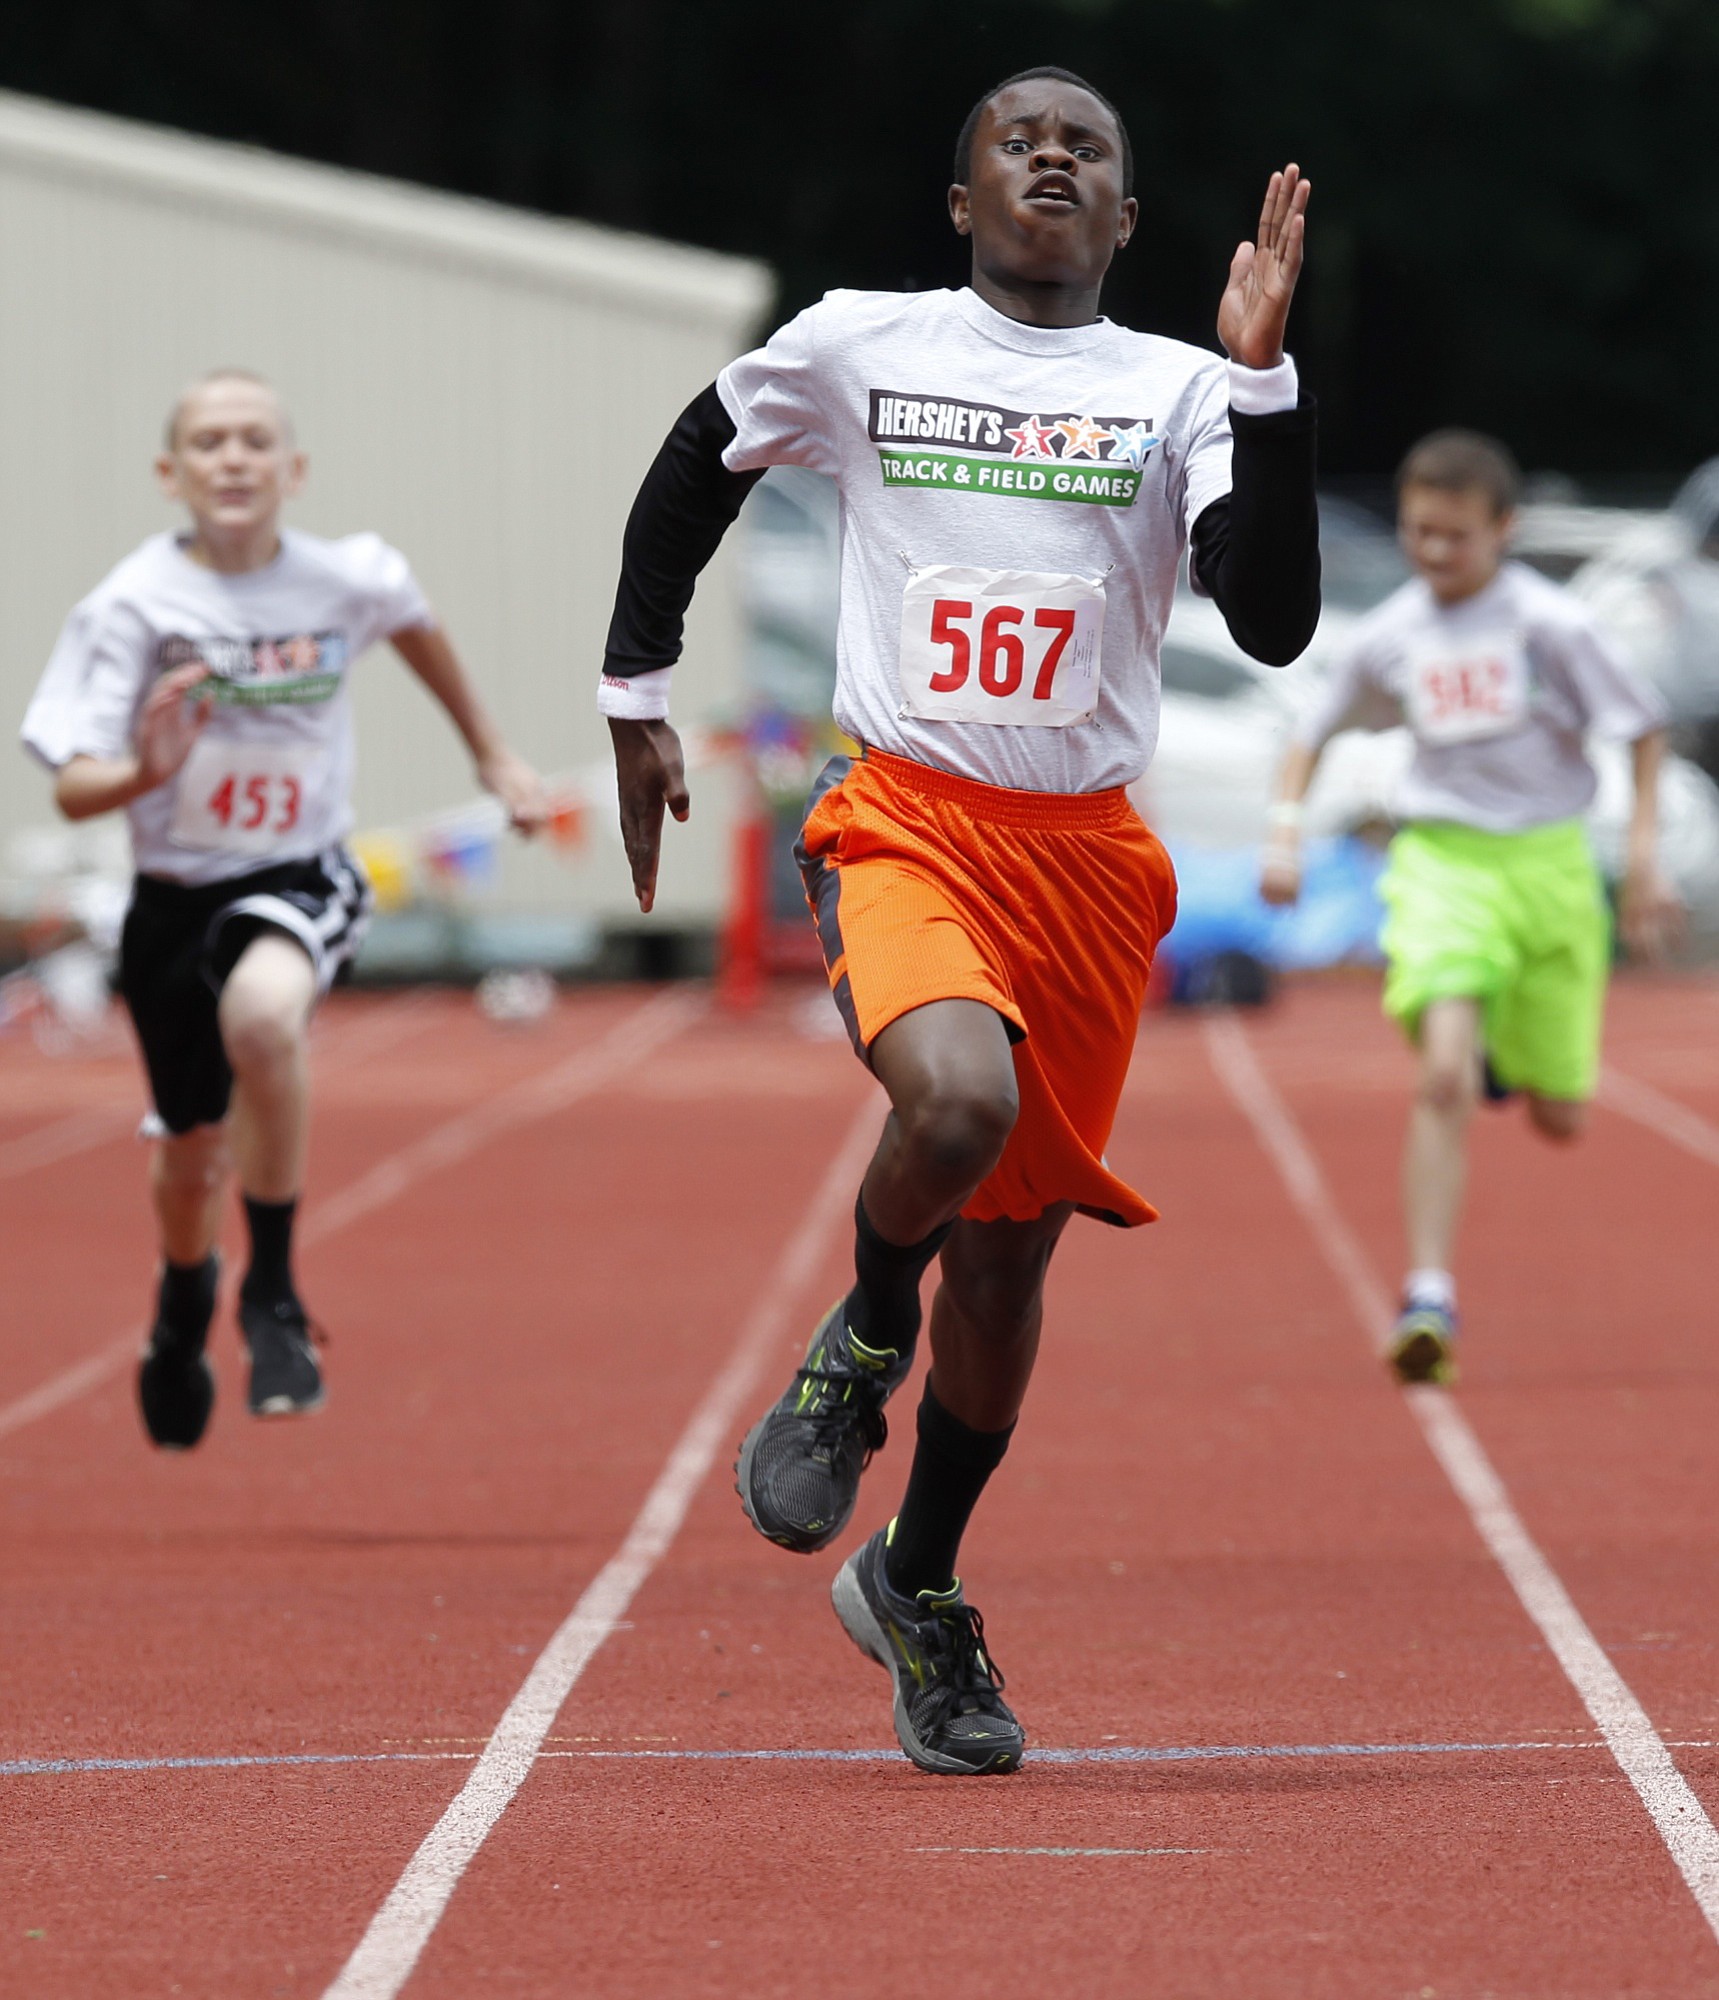 Emmanuel Huang of Vancouver won the 100 meters for boys ages 11-12 in the Hershey's Track and Field Program Washington State Meet held Saturday at McKenzie Stadium in Vancouver.